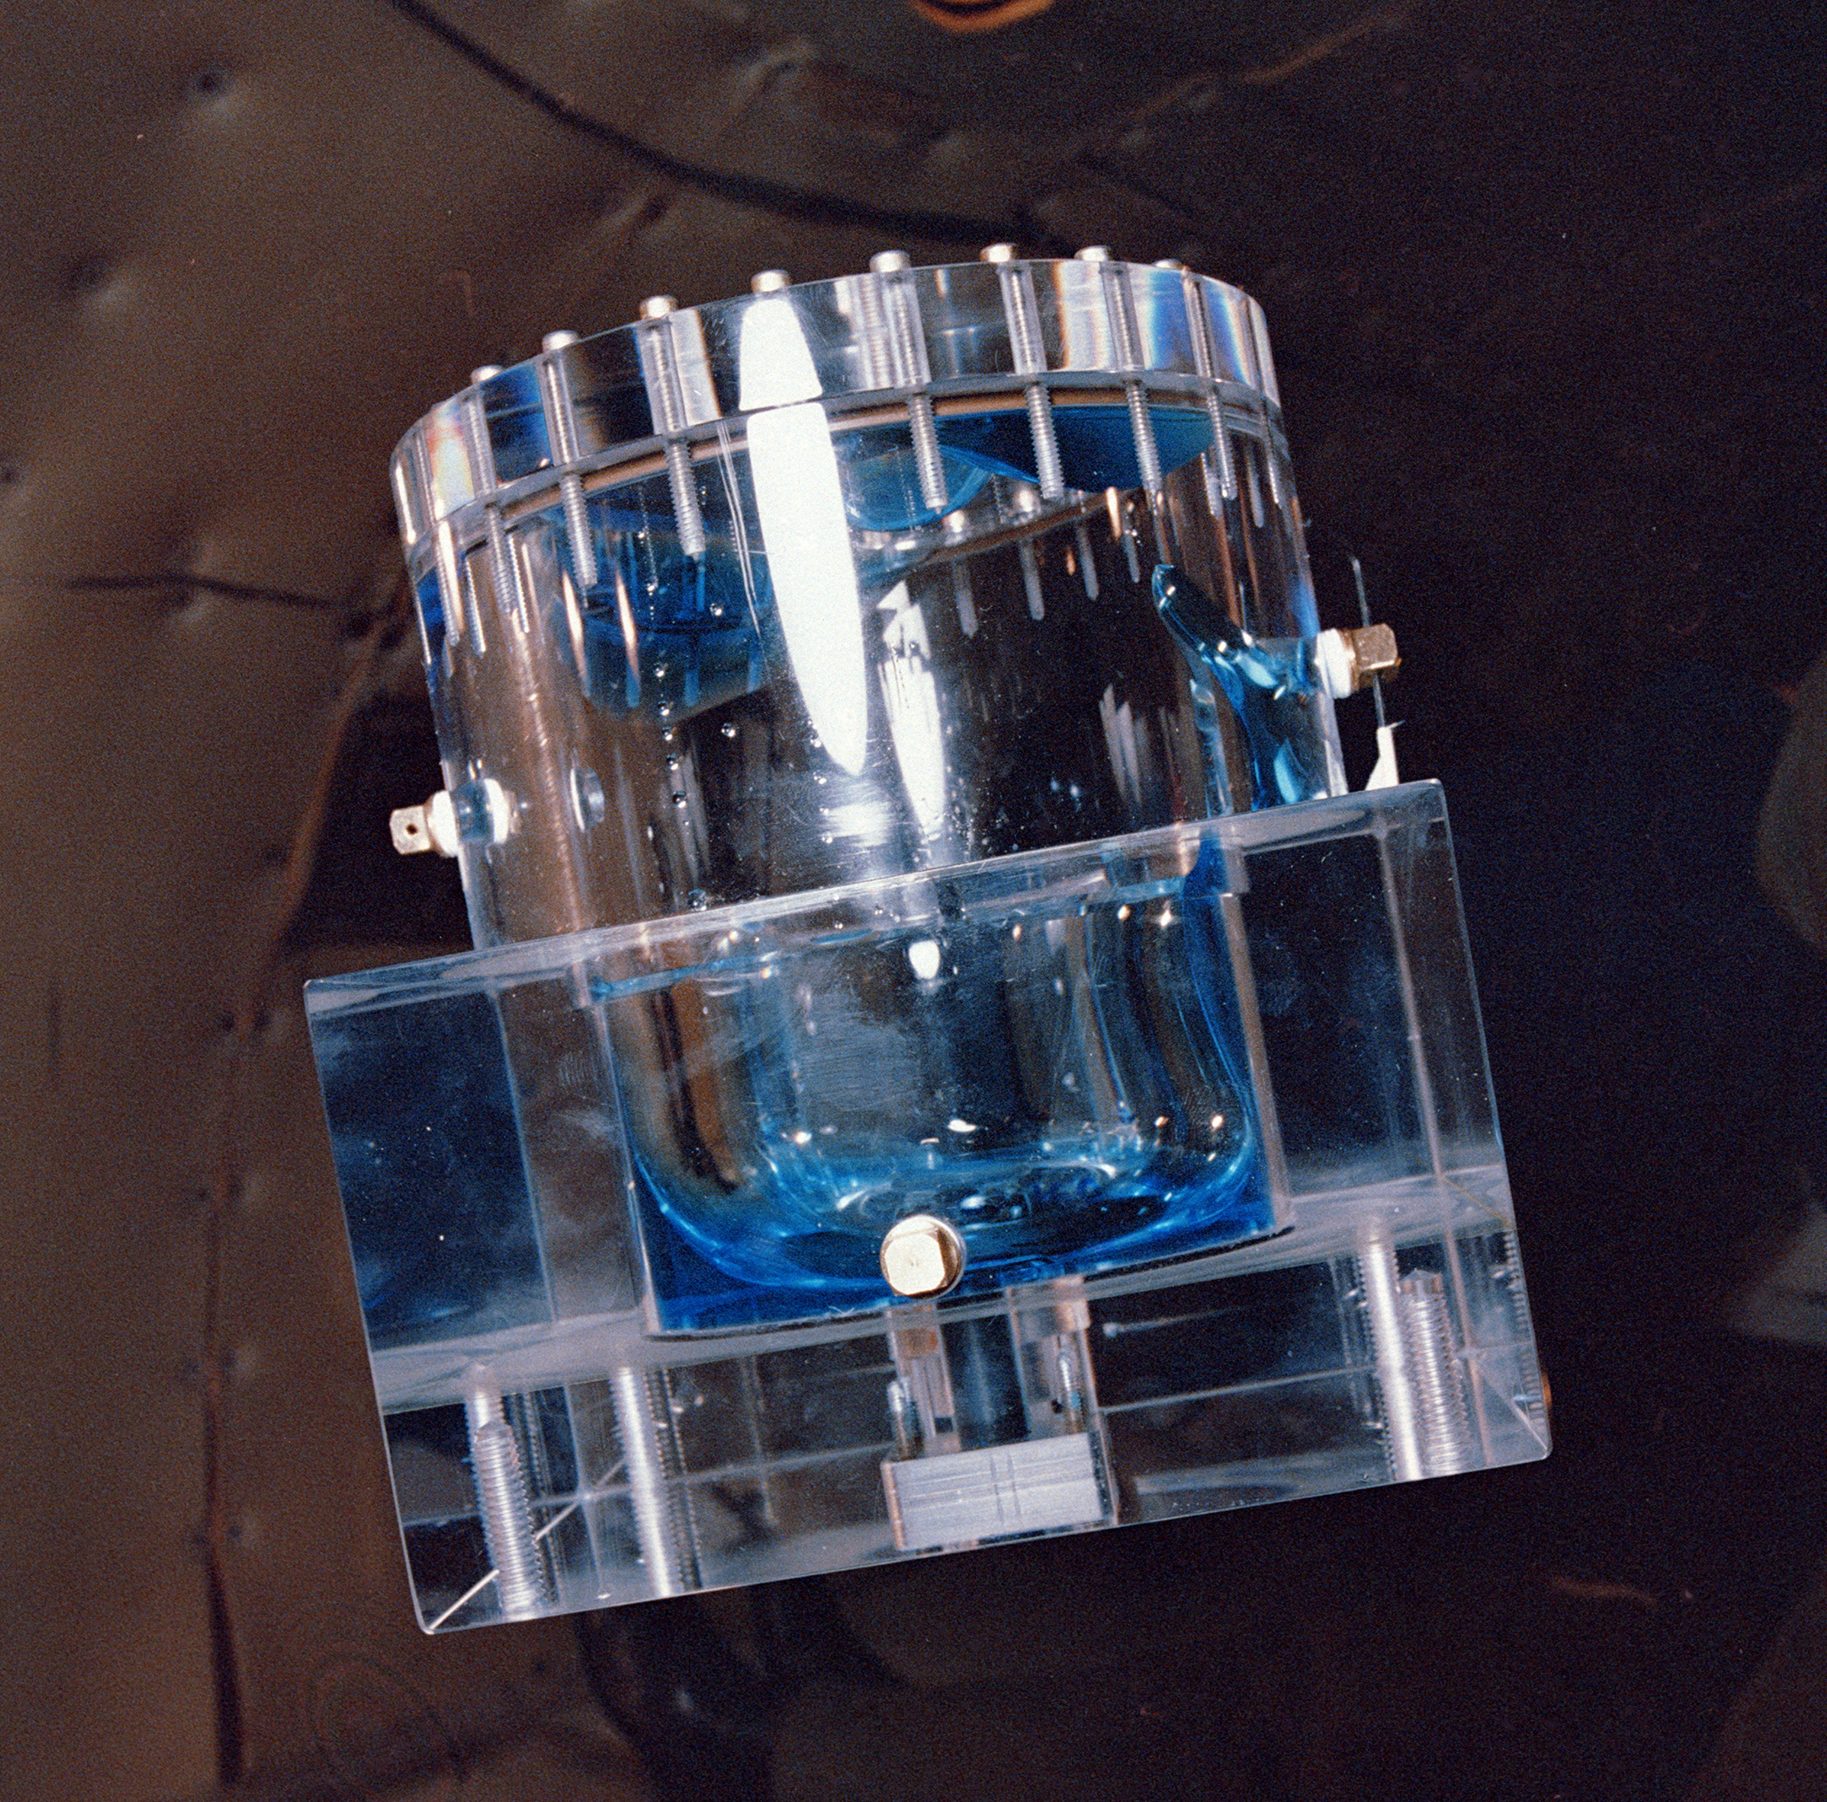 Close view of the STDCE experiment.